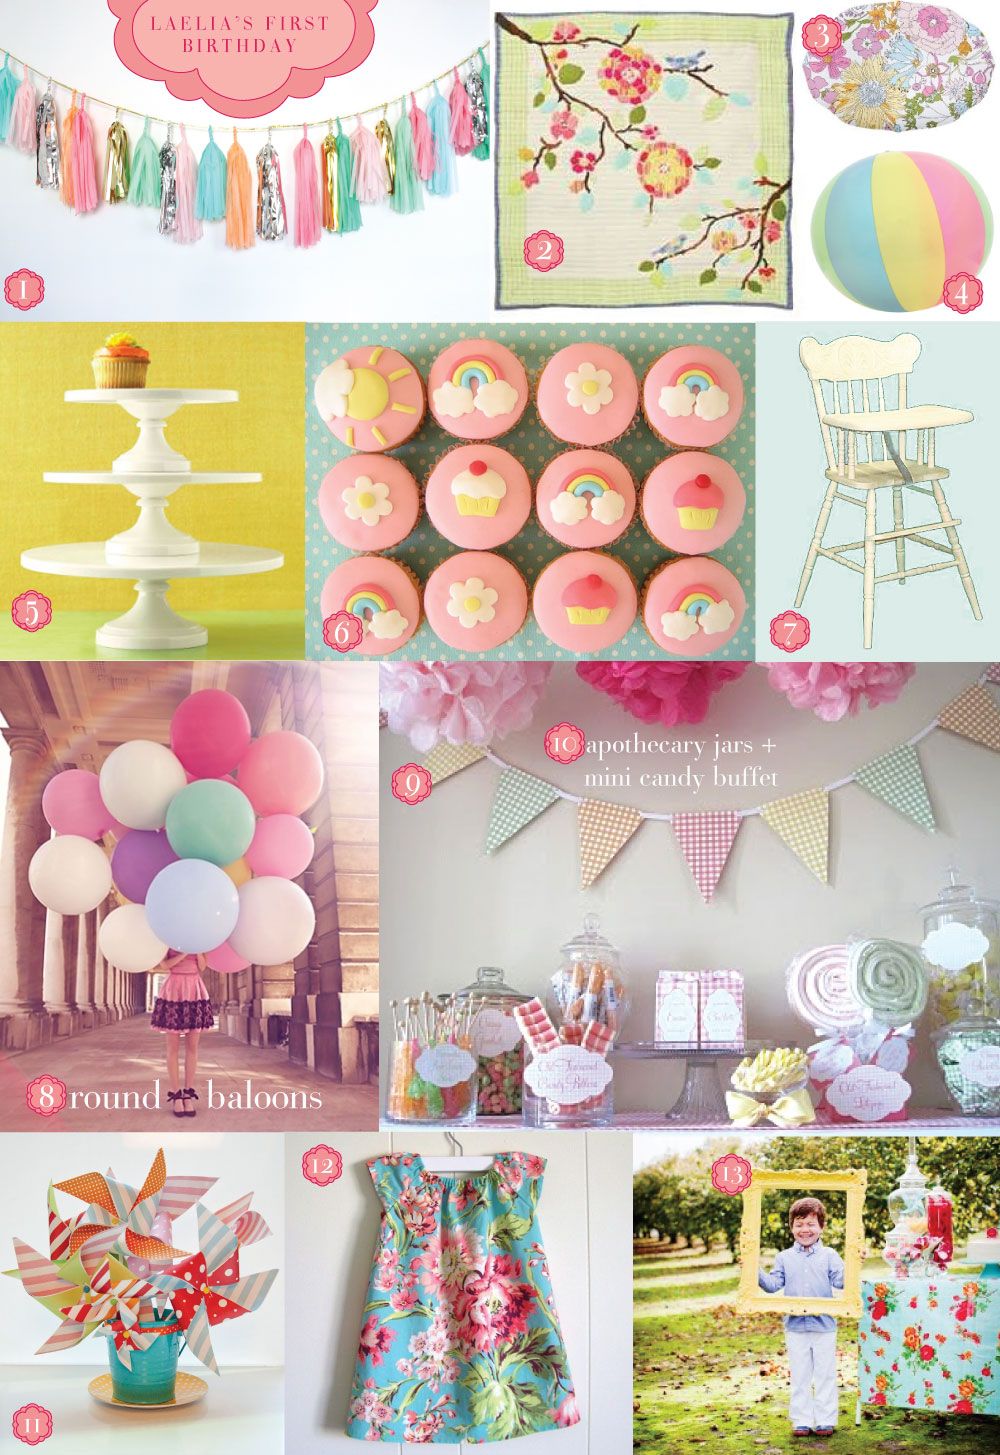 lots of pretty pastel colors, would go good for a vintage tea party baby shower